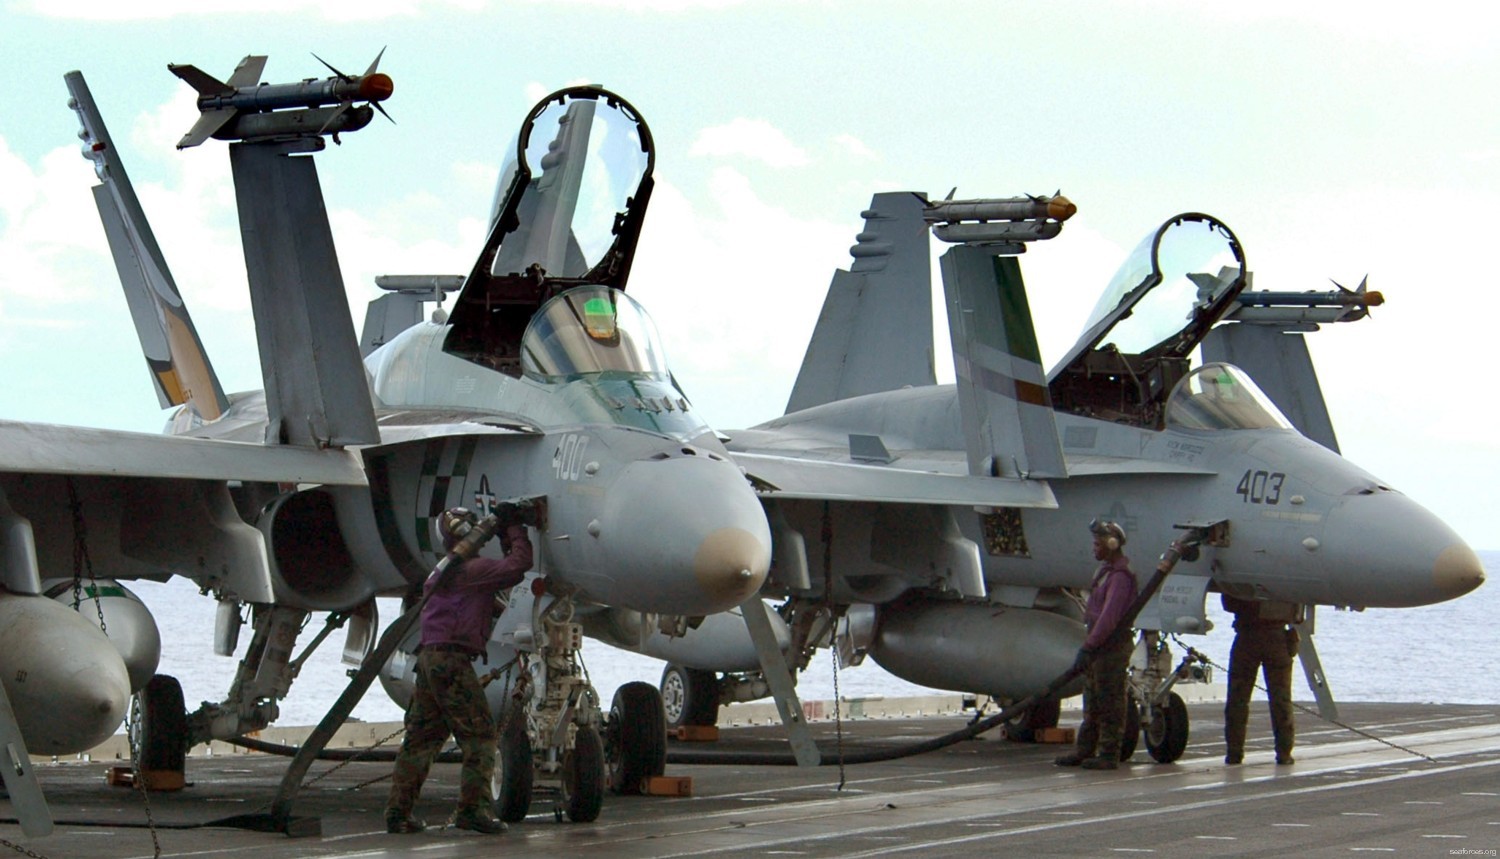 vfa-195 dambusters strike fighter squadron navy f/a-18c hornet carrier air wing cvw-5 uss kitty hawk cv-63 106